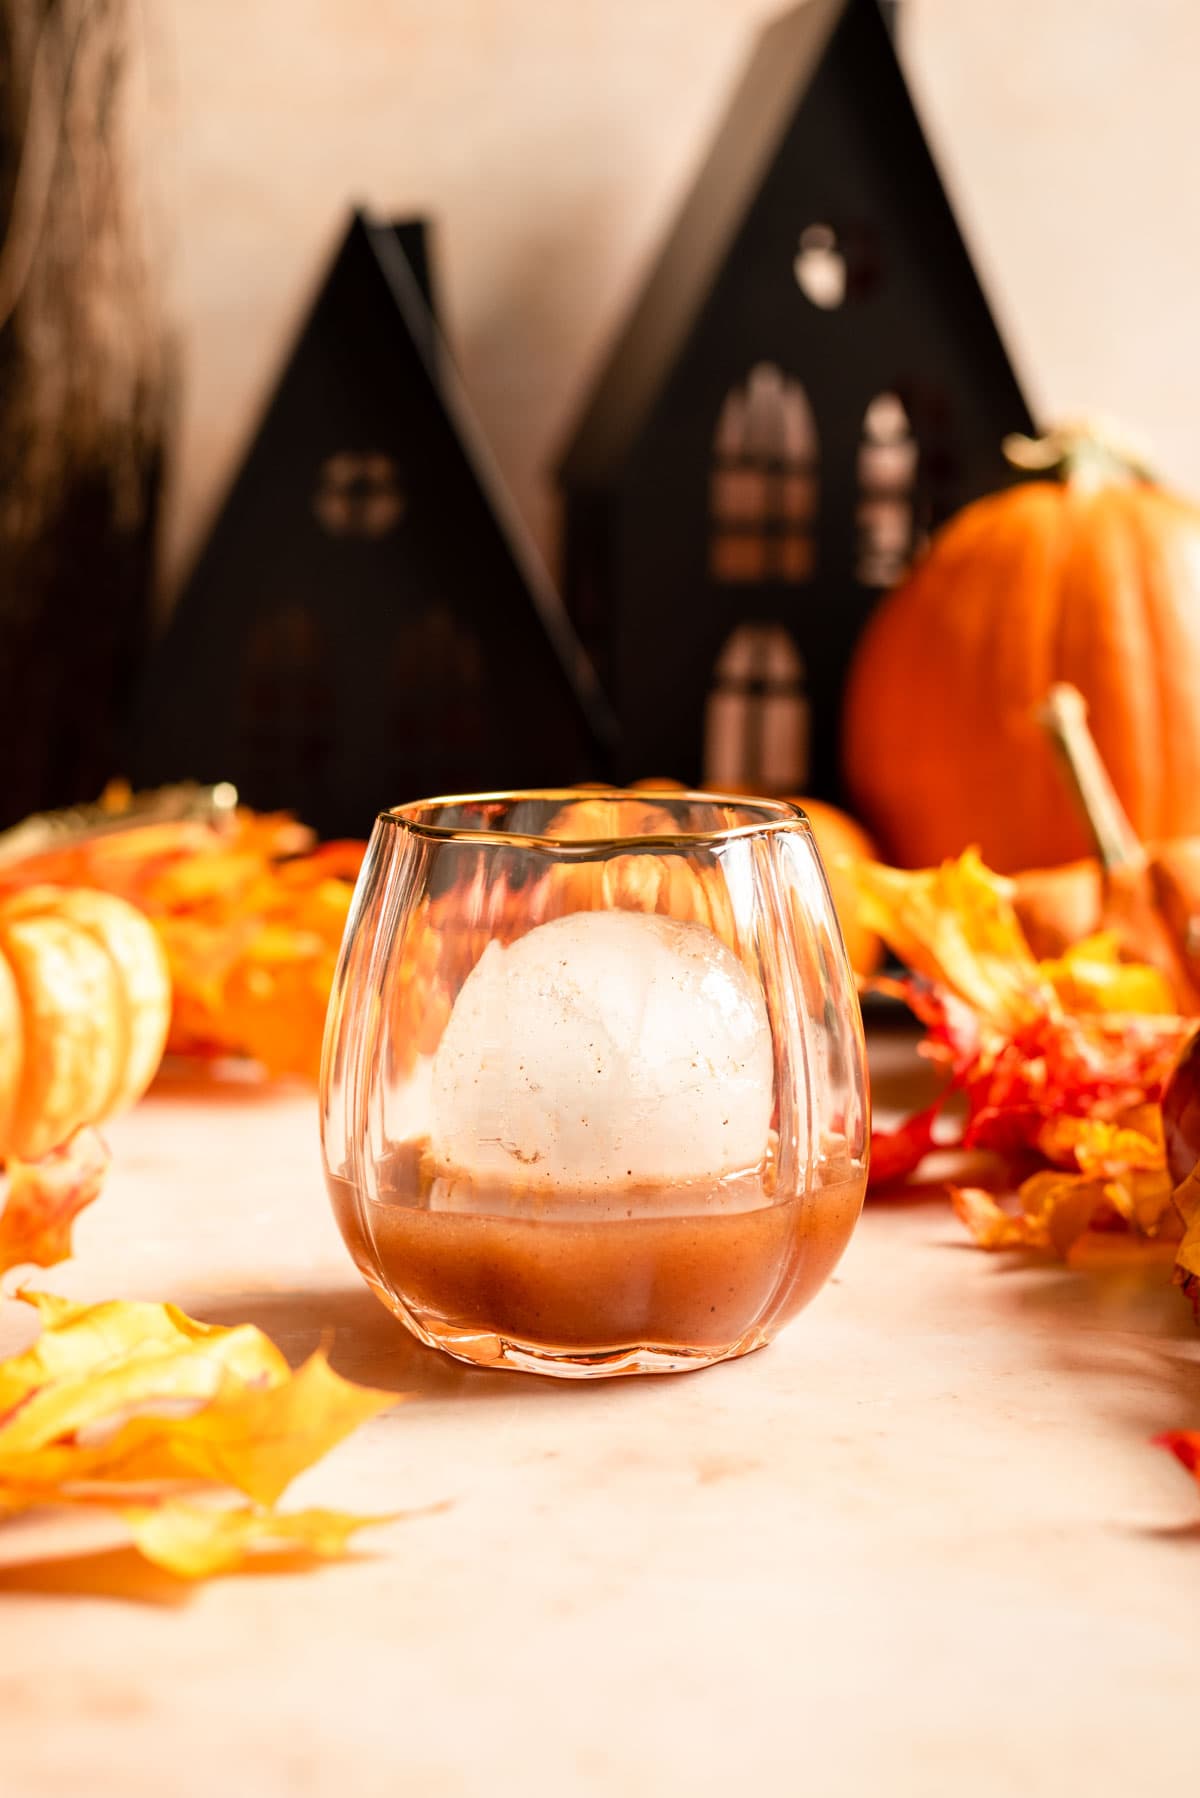 The bourbon mixture in a pumkin shaped glass with a large circle ice cube.